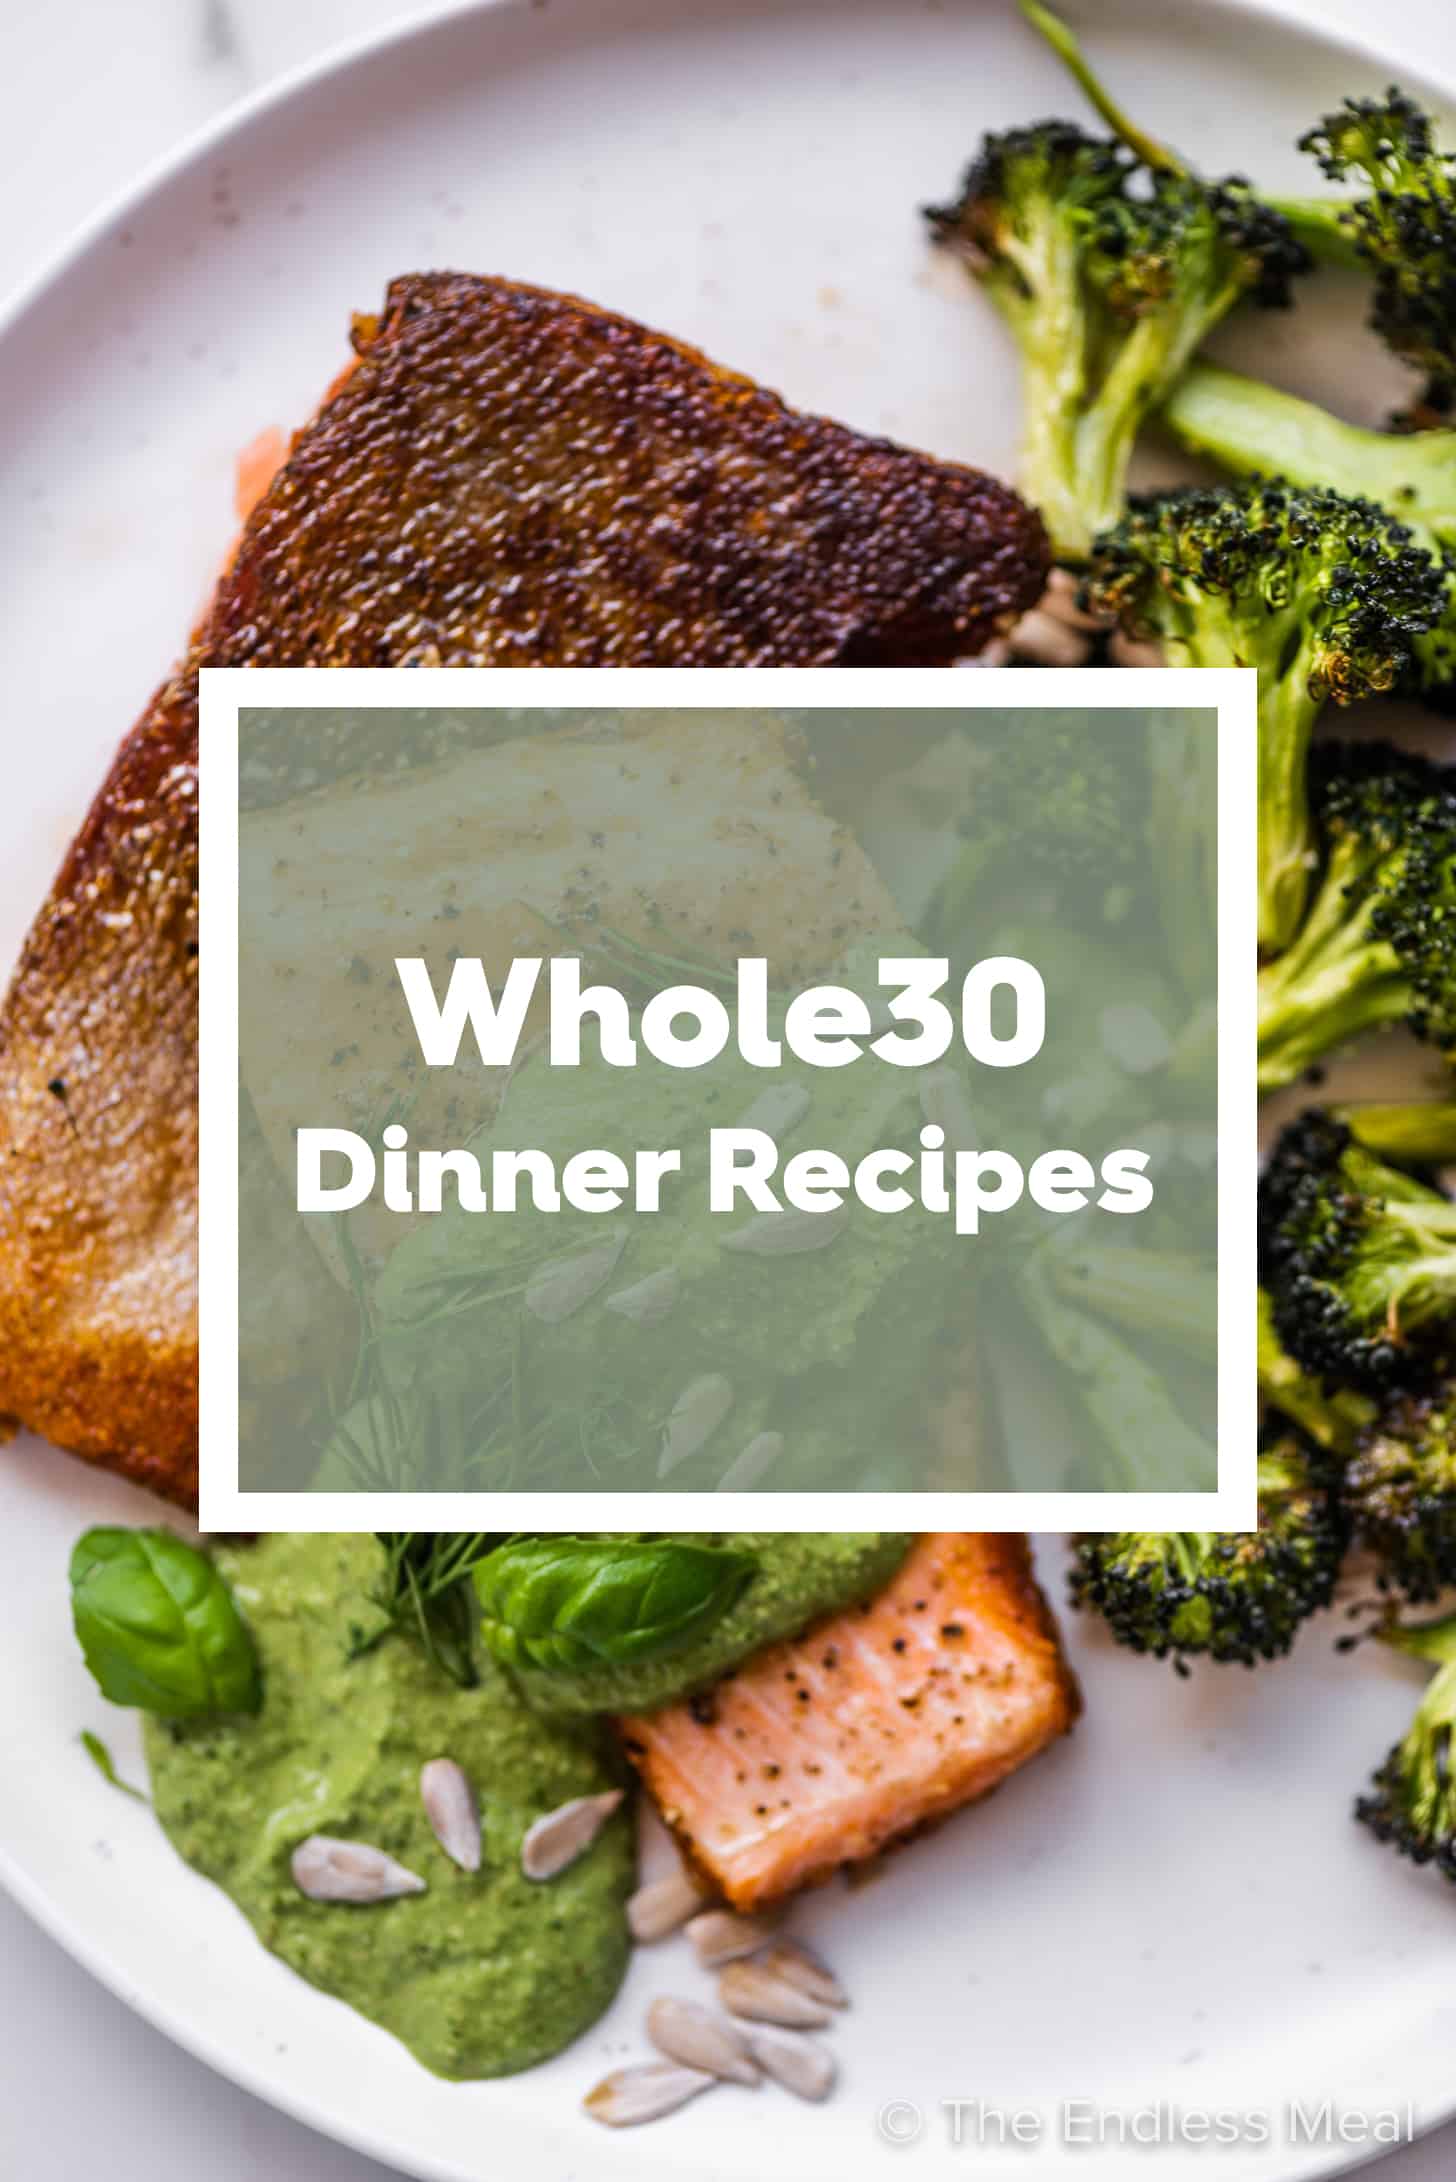 Best Whole30 Dinner Recipes - The Endless Meal®